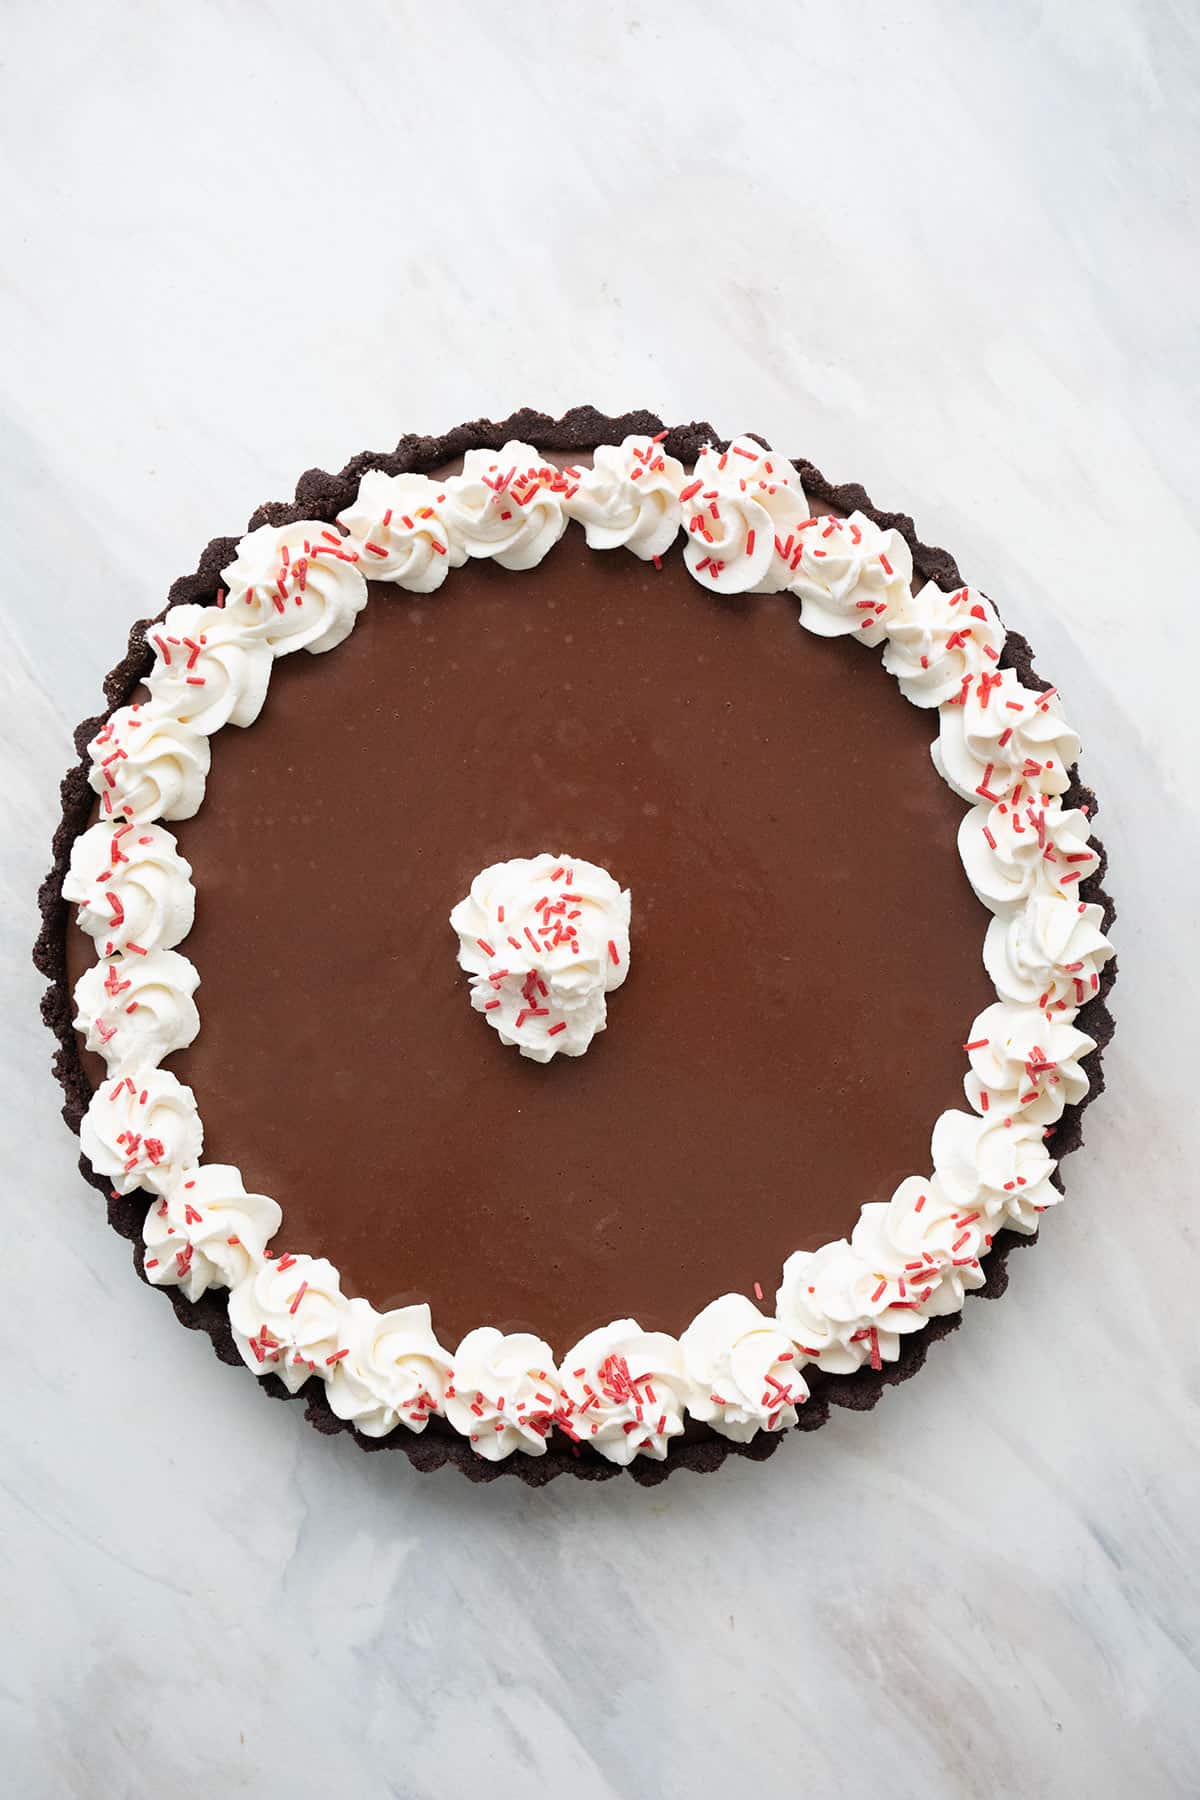 Top down image of Keto Chocolate Peppermint Tart on a marble tabletop.